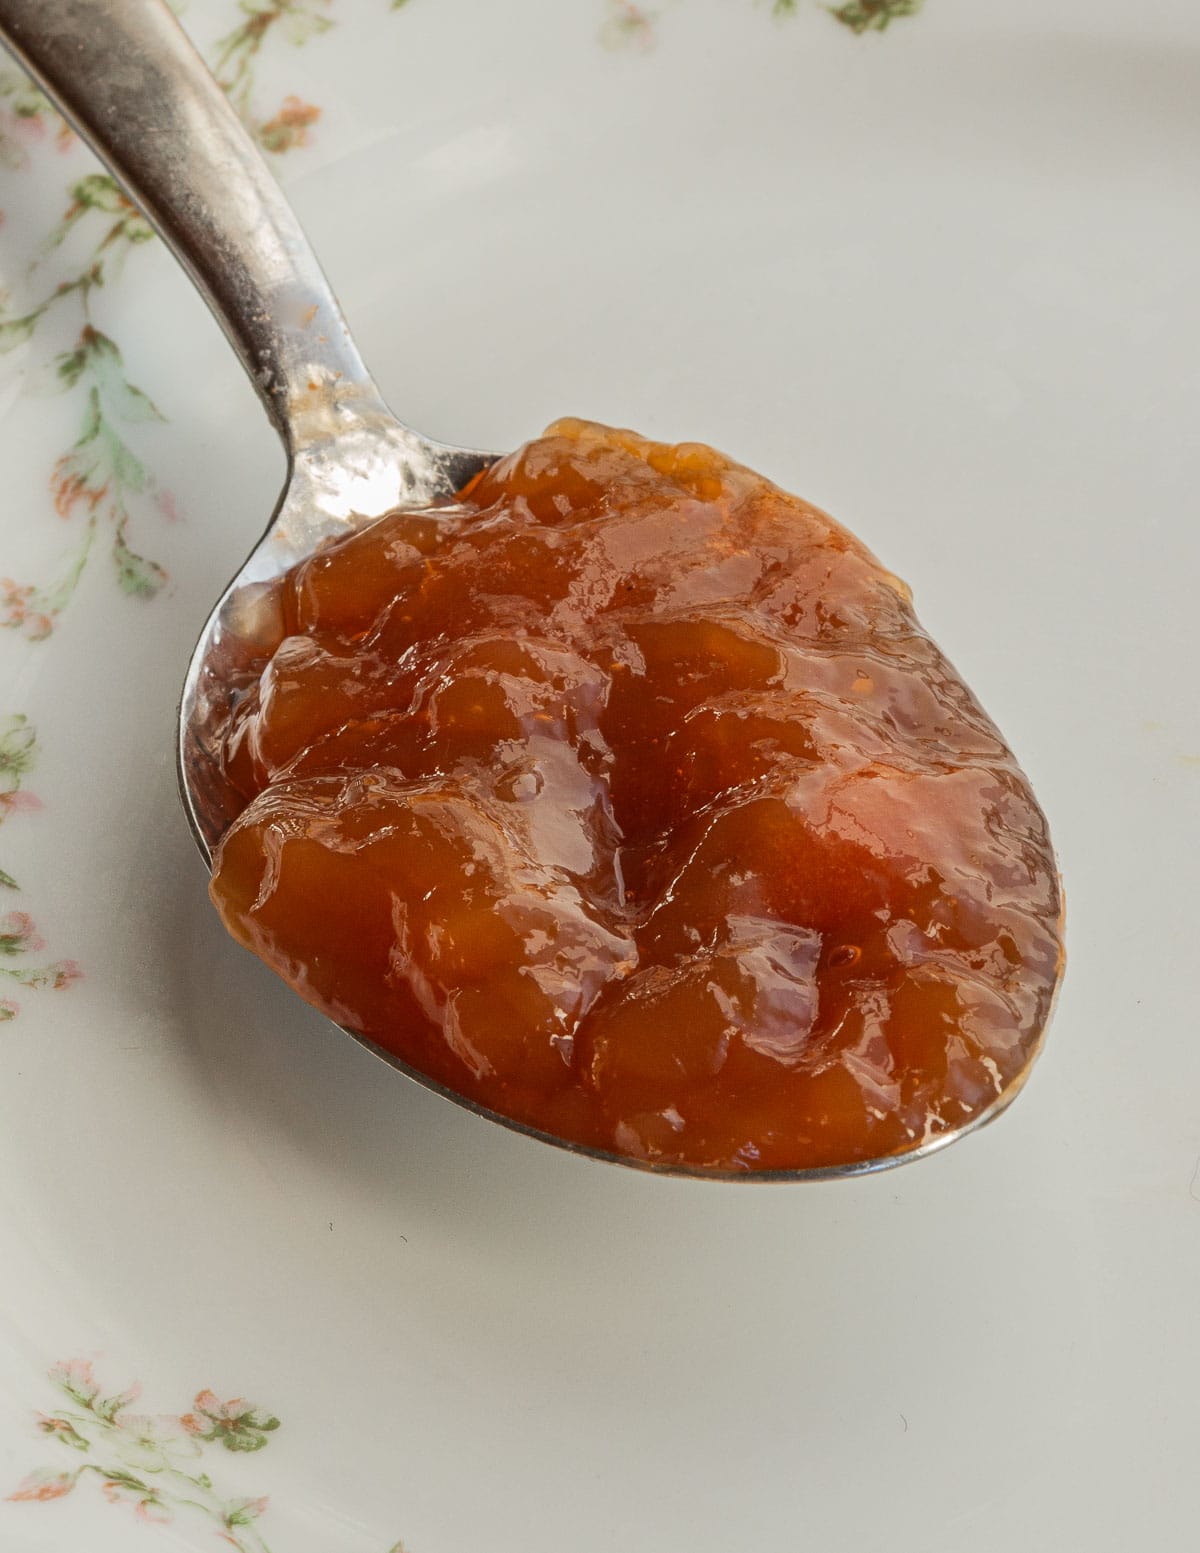 A spoonful of jelled remoulage stock on a china plate. 